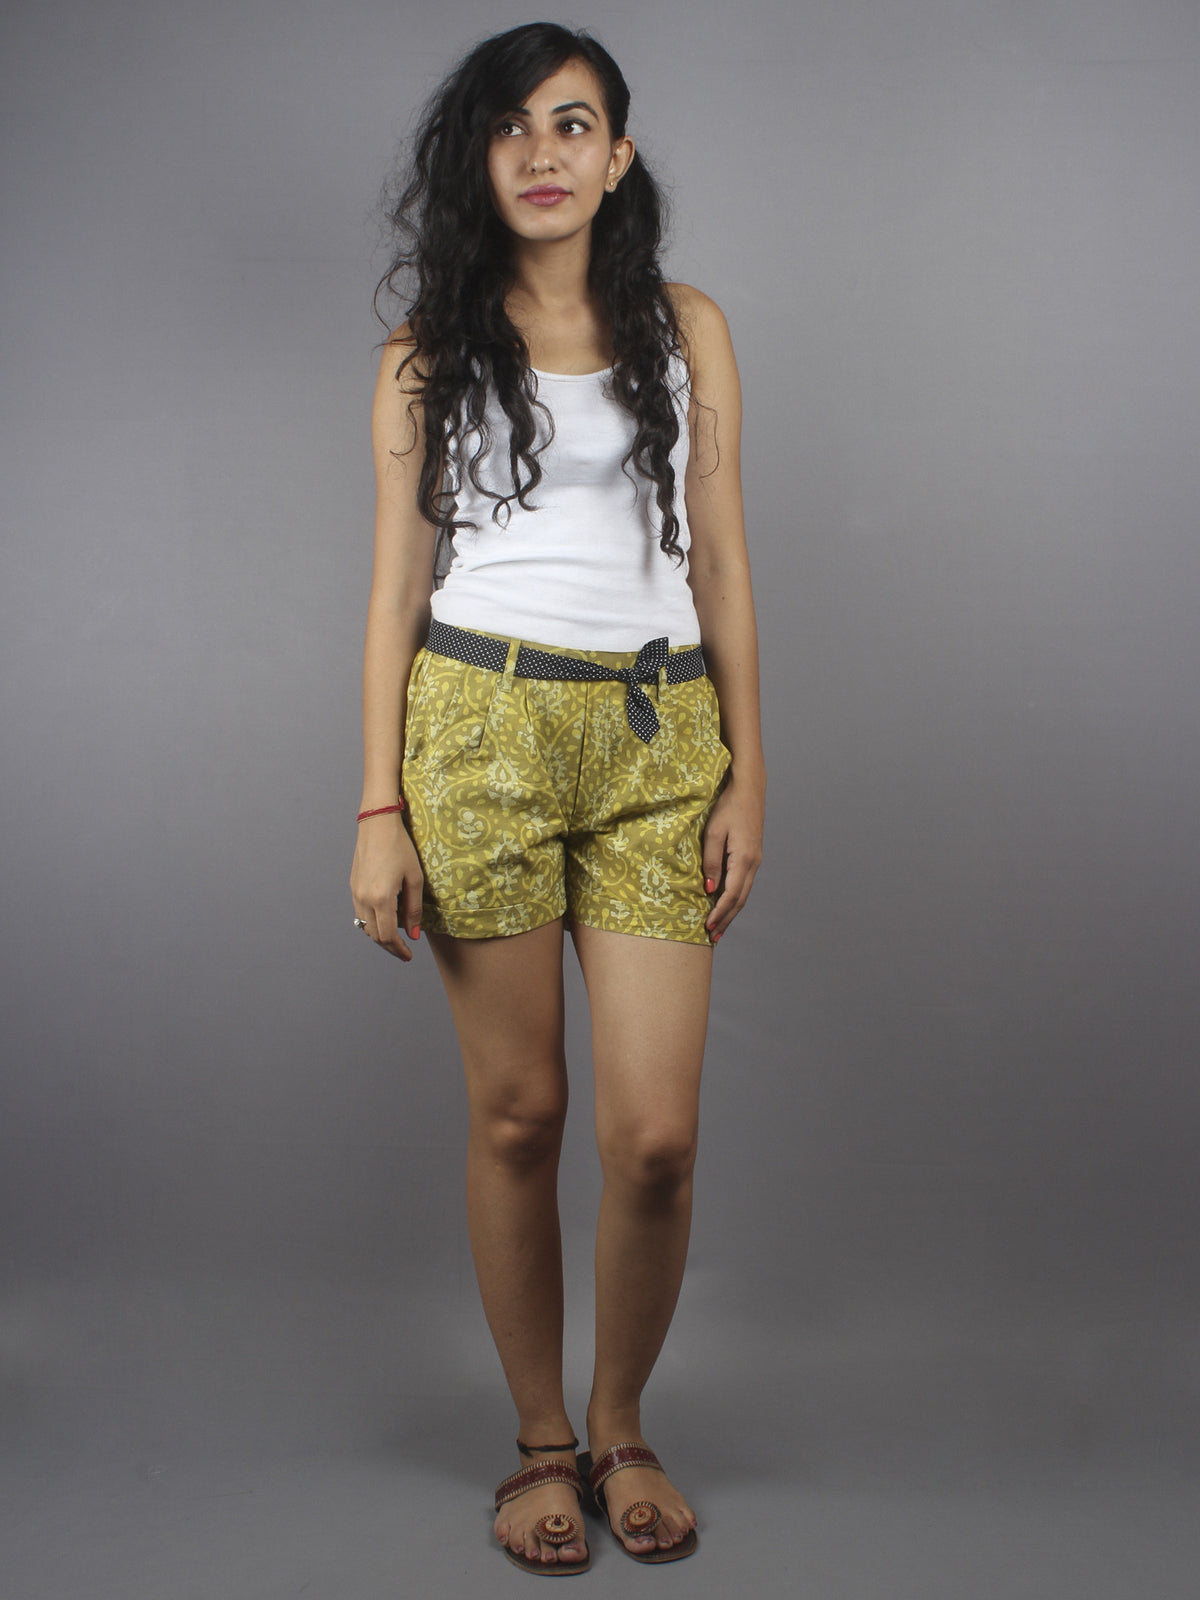 Green Hand Block Printed Shorts With Belt -S5296036